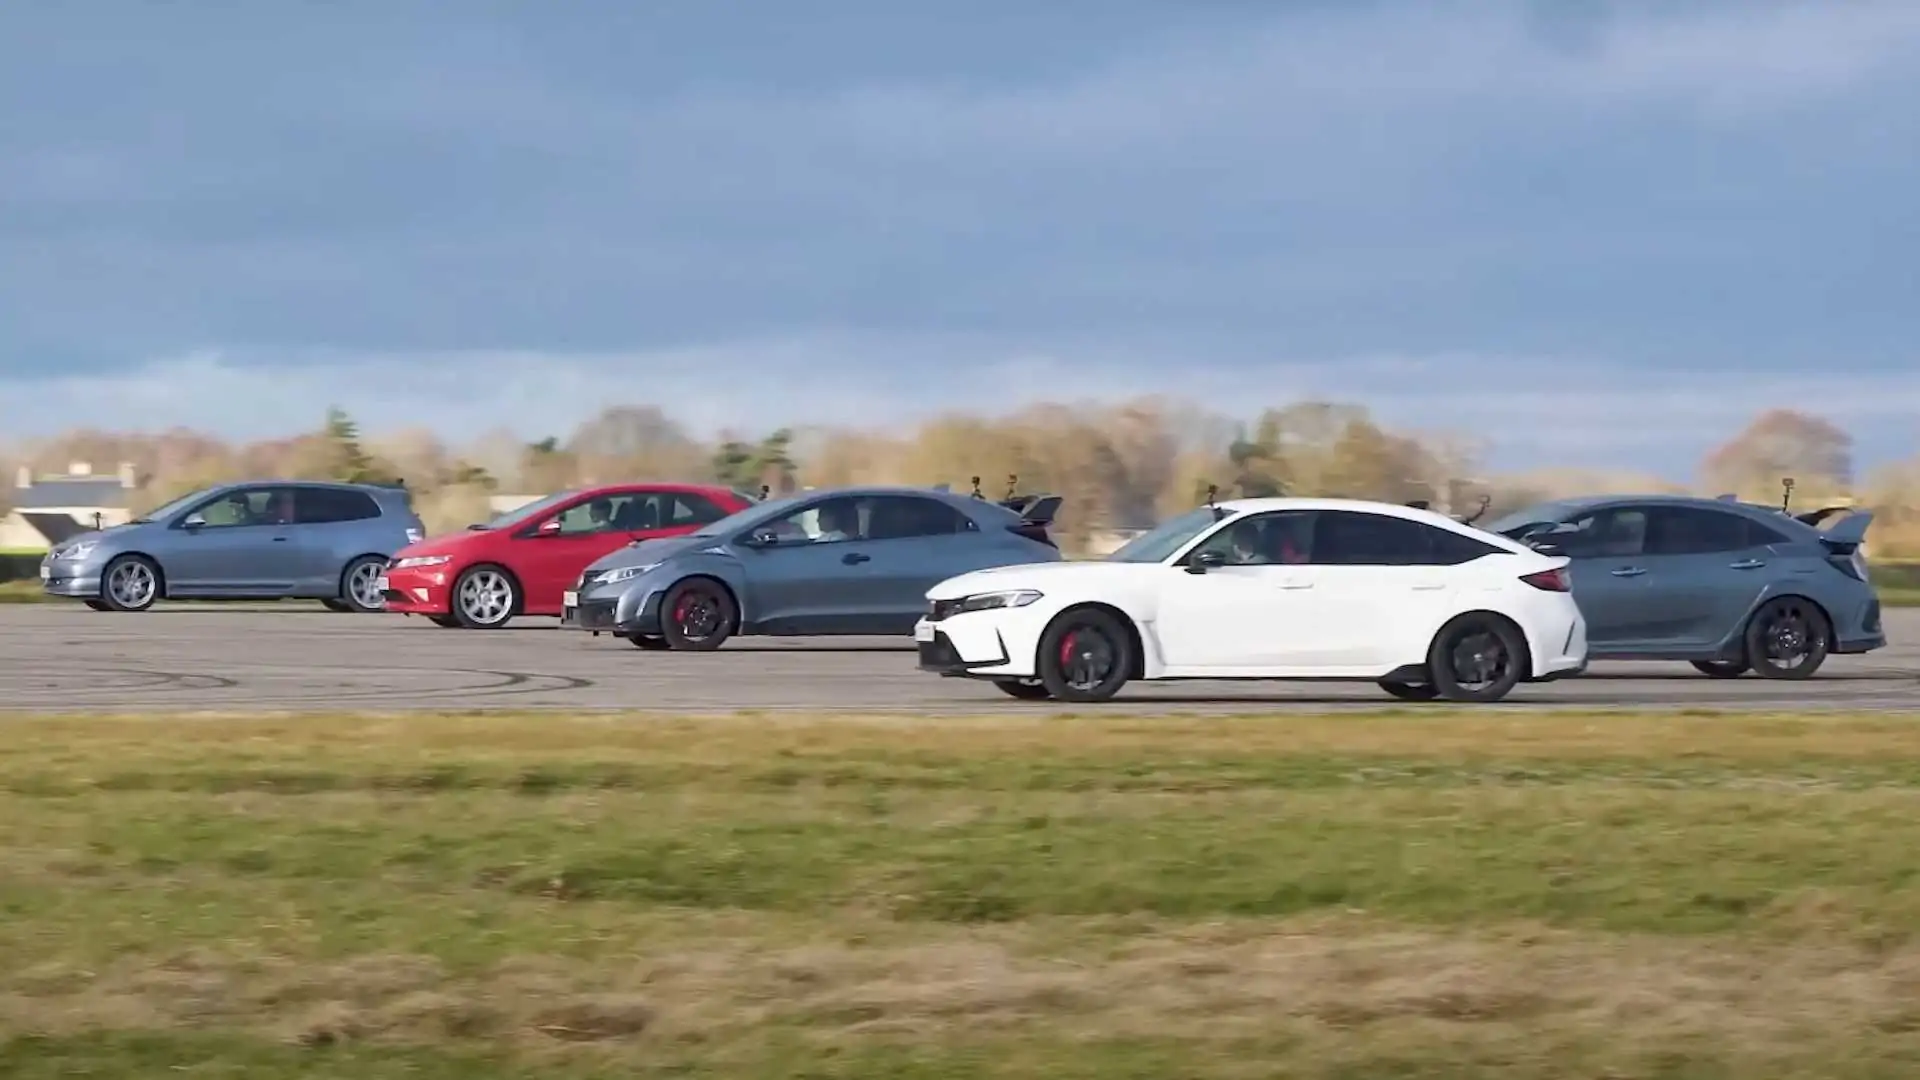 Watch Five Generations Of Honda Civic Type R Go Toe-To-Toe In A Drag Race